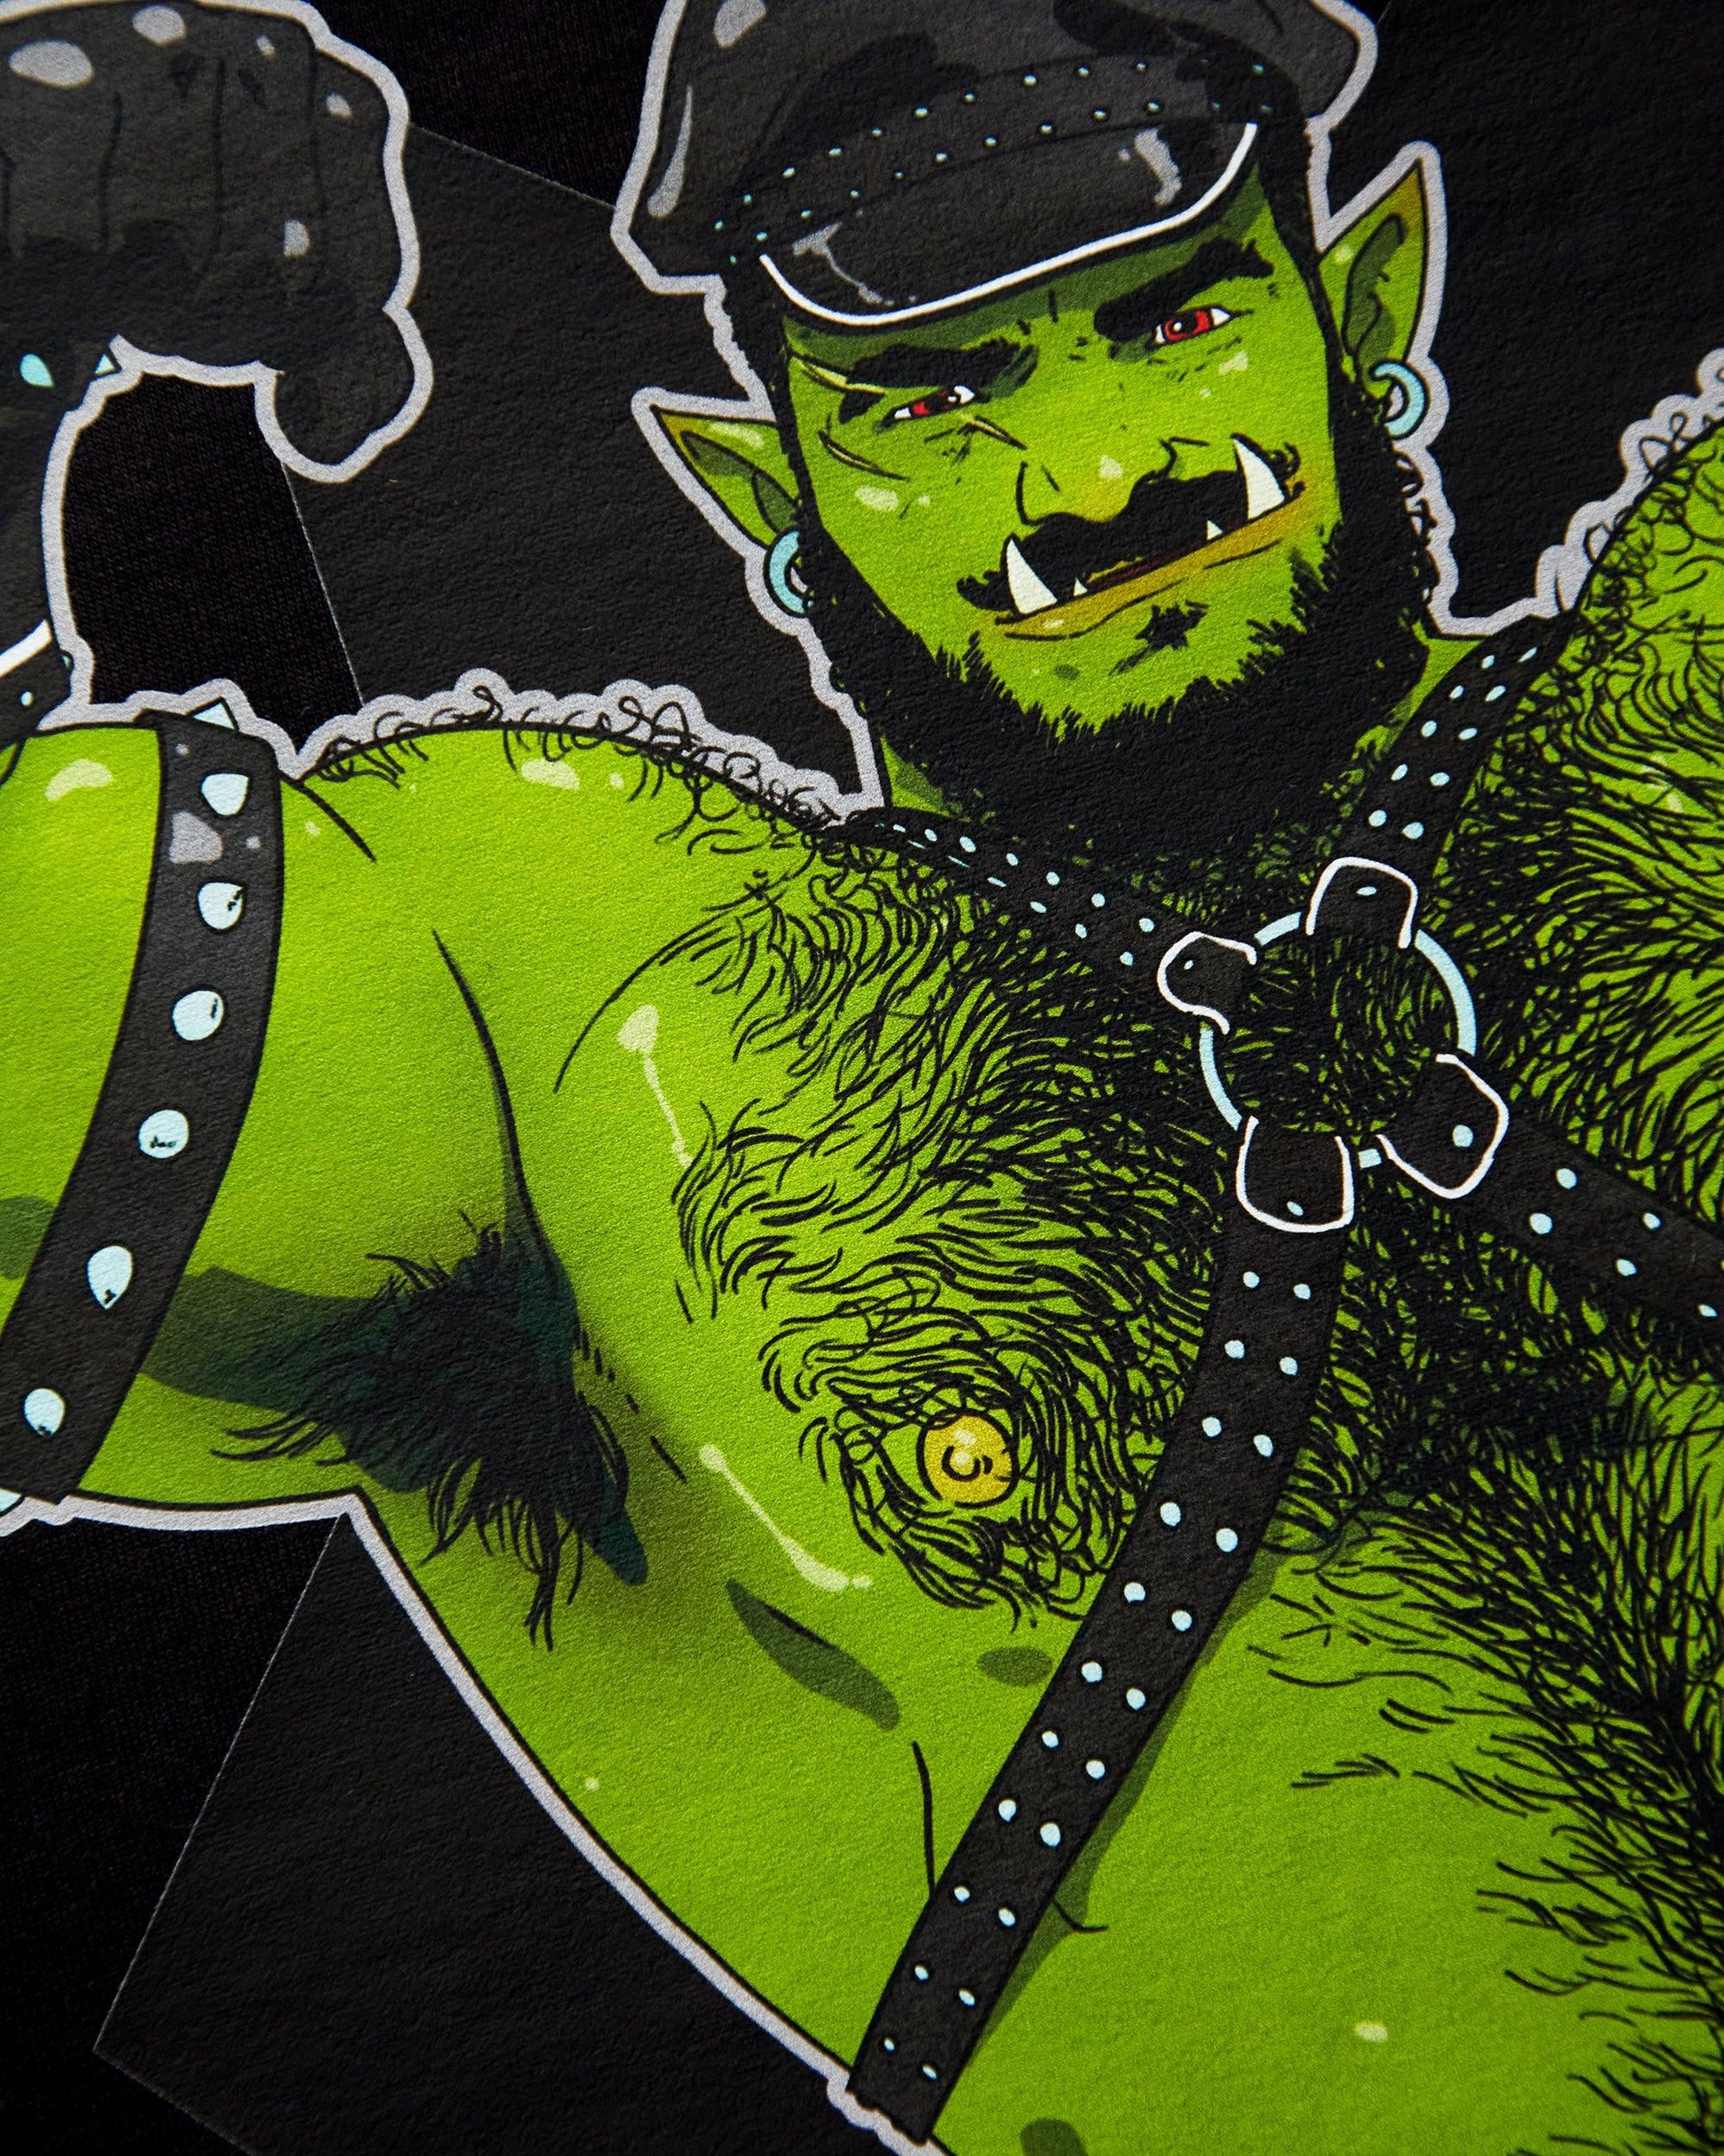 Leather daddy orc Rex loves to flex - mens sleeveless crop top - HOMOLONDON